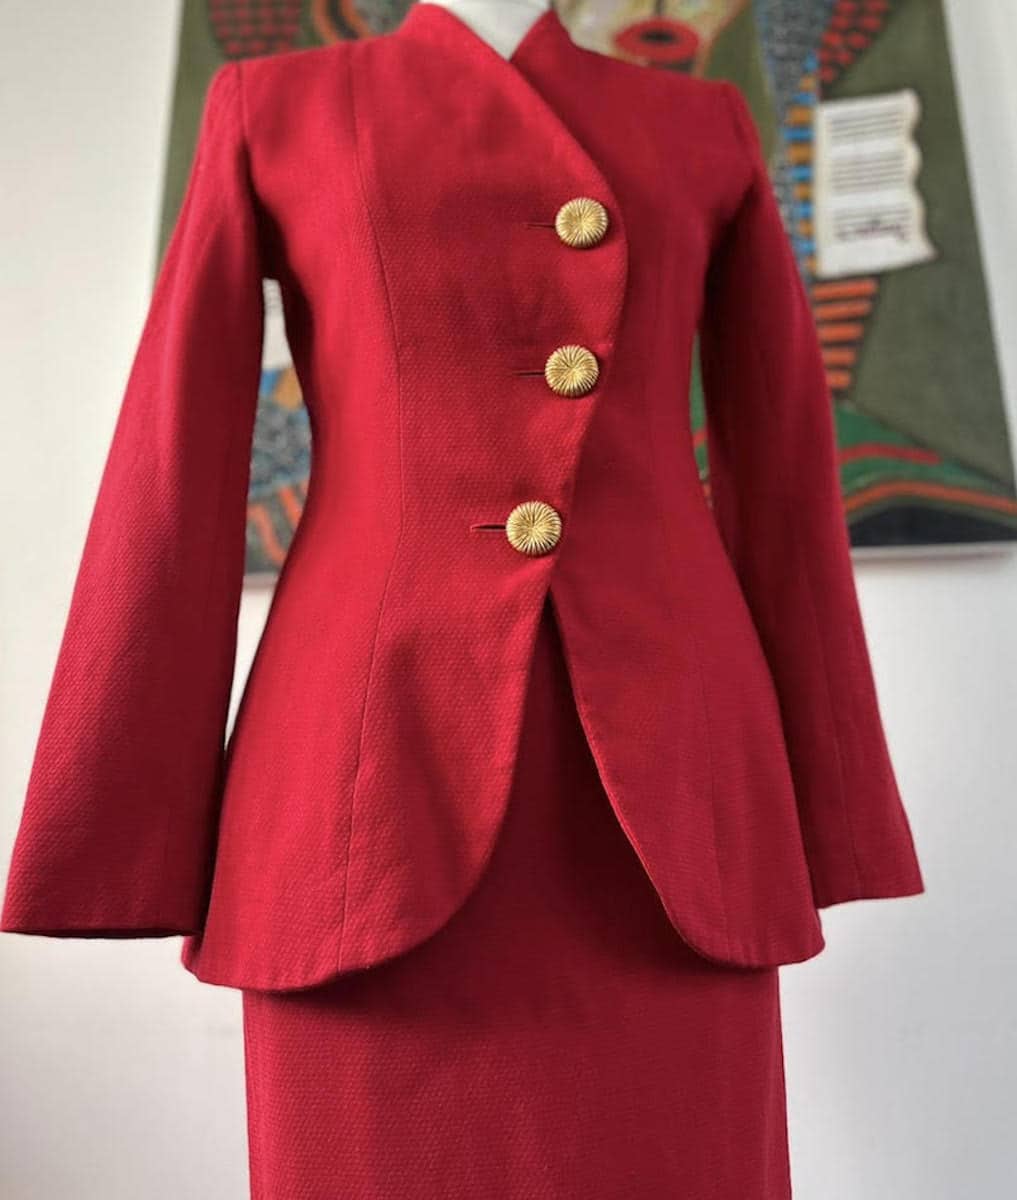 SOLD ~ Vintage 1970s Yves Saint Laurent Trench Coat - The Red